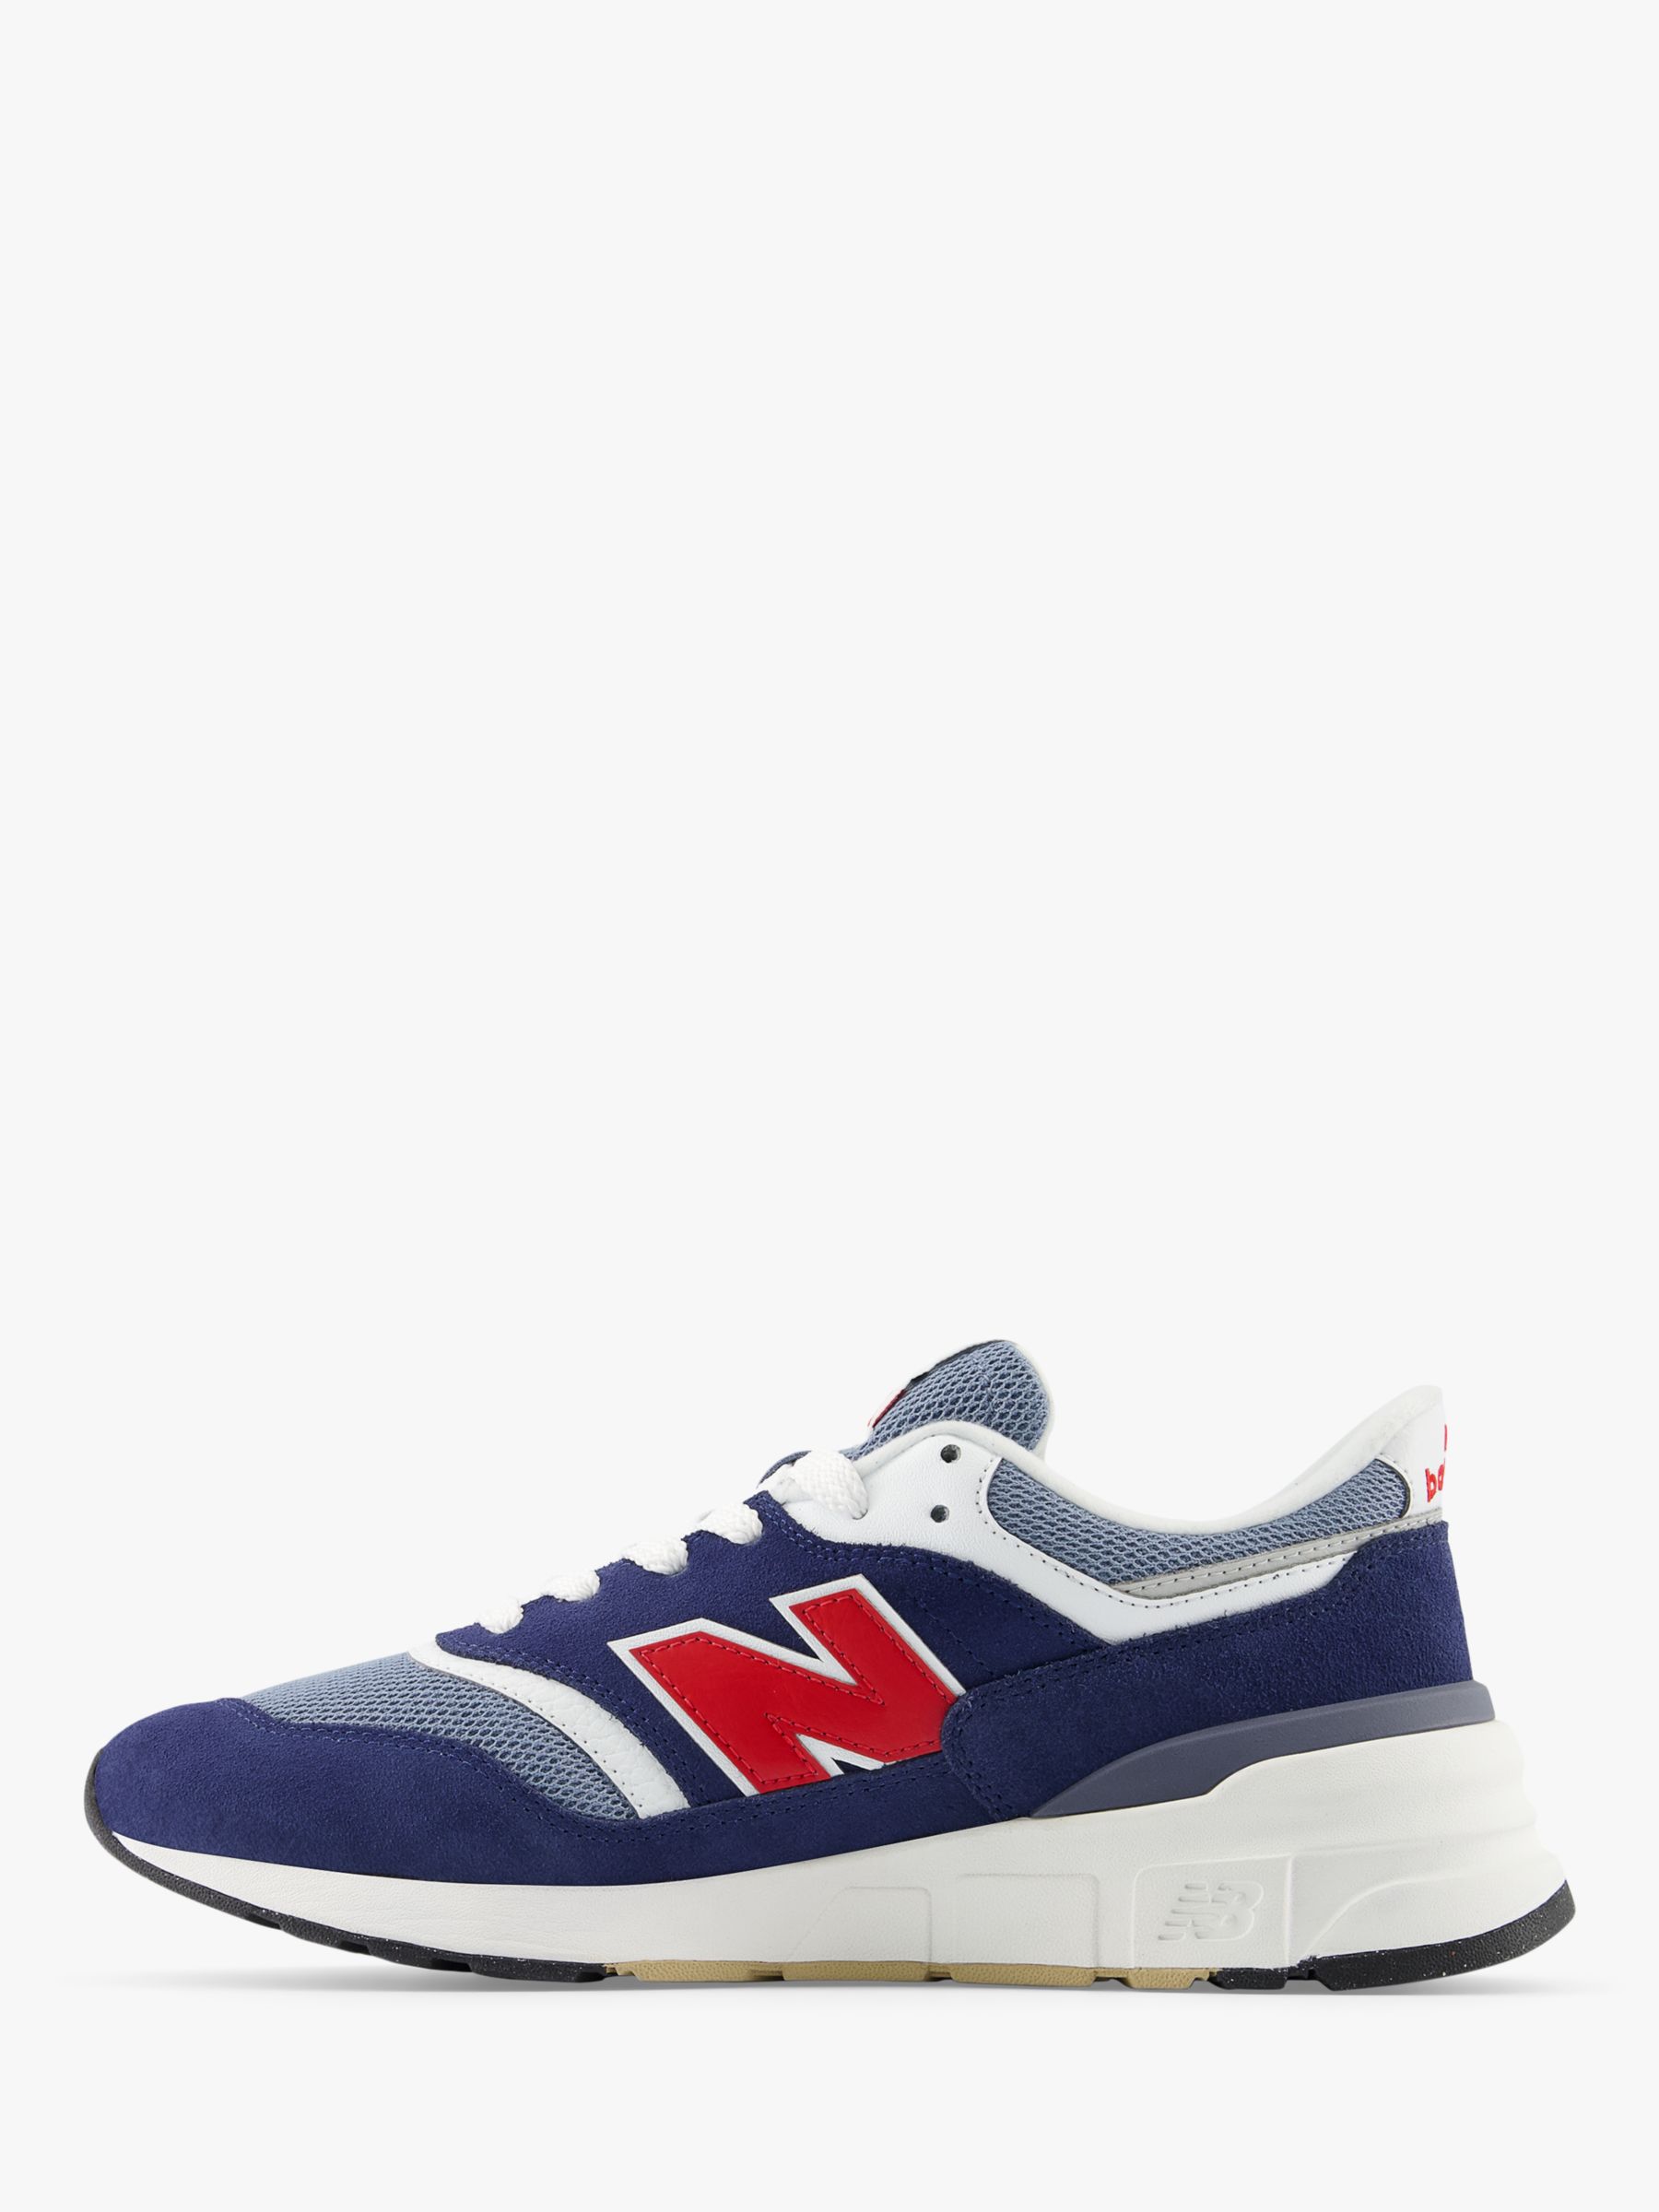 New Balance 997R Suede Mesh Trainers, Navy/Multi, 8